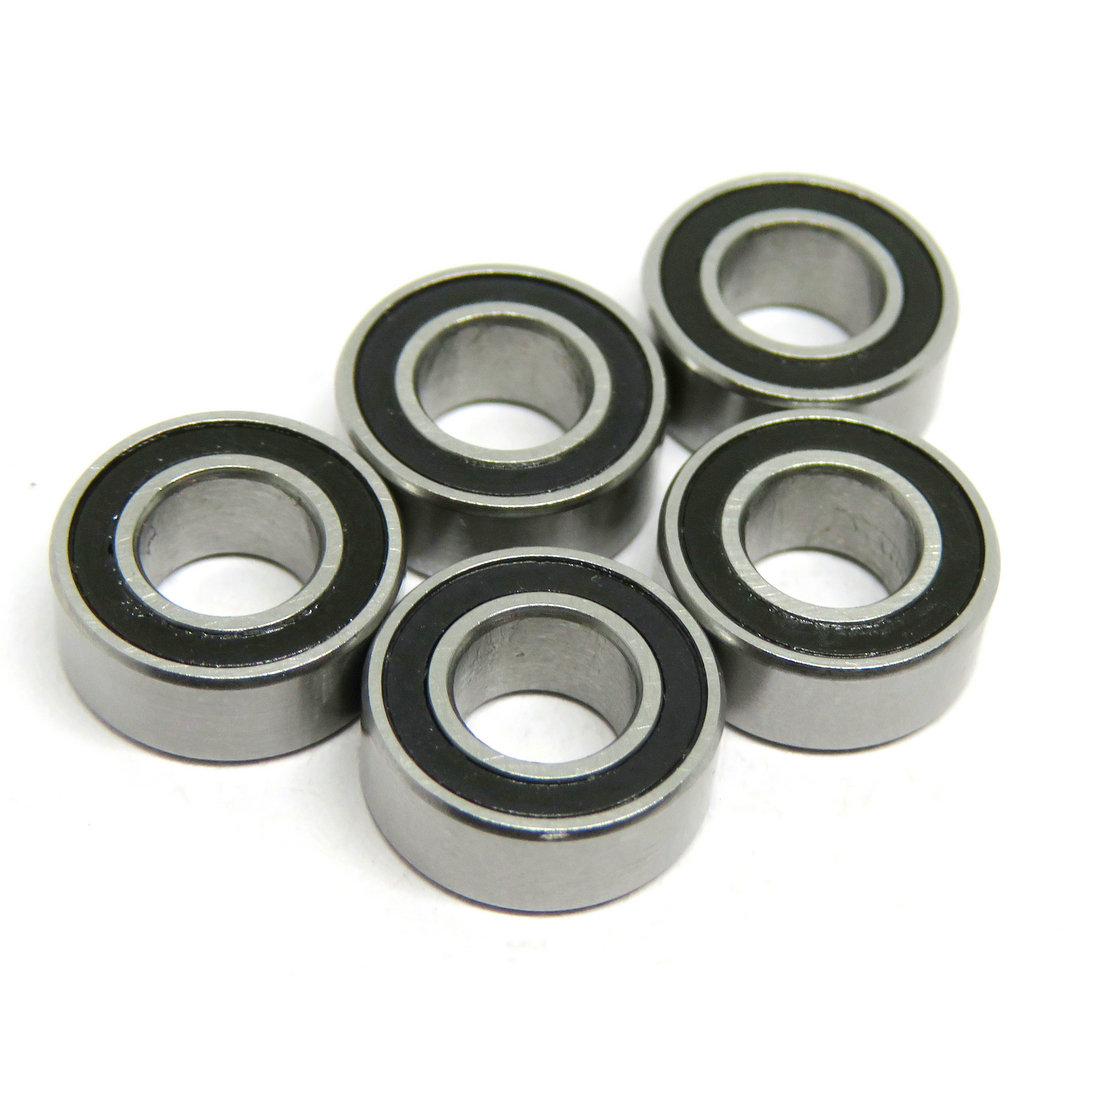 6 mm Round ID MR126RS MR126 RS 6x12x4mm Rubber Shielded Ball Bearing L-1260RS Miniature Bearing.jpg